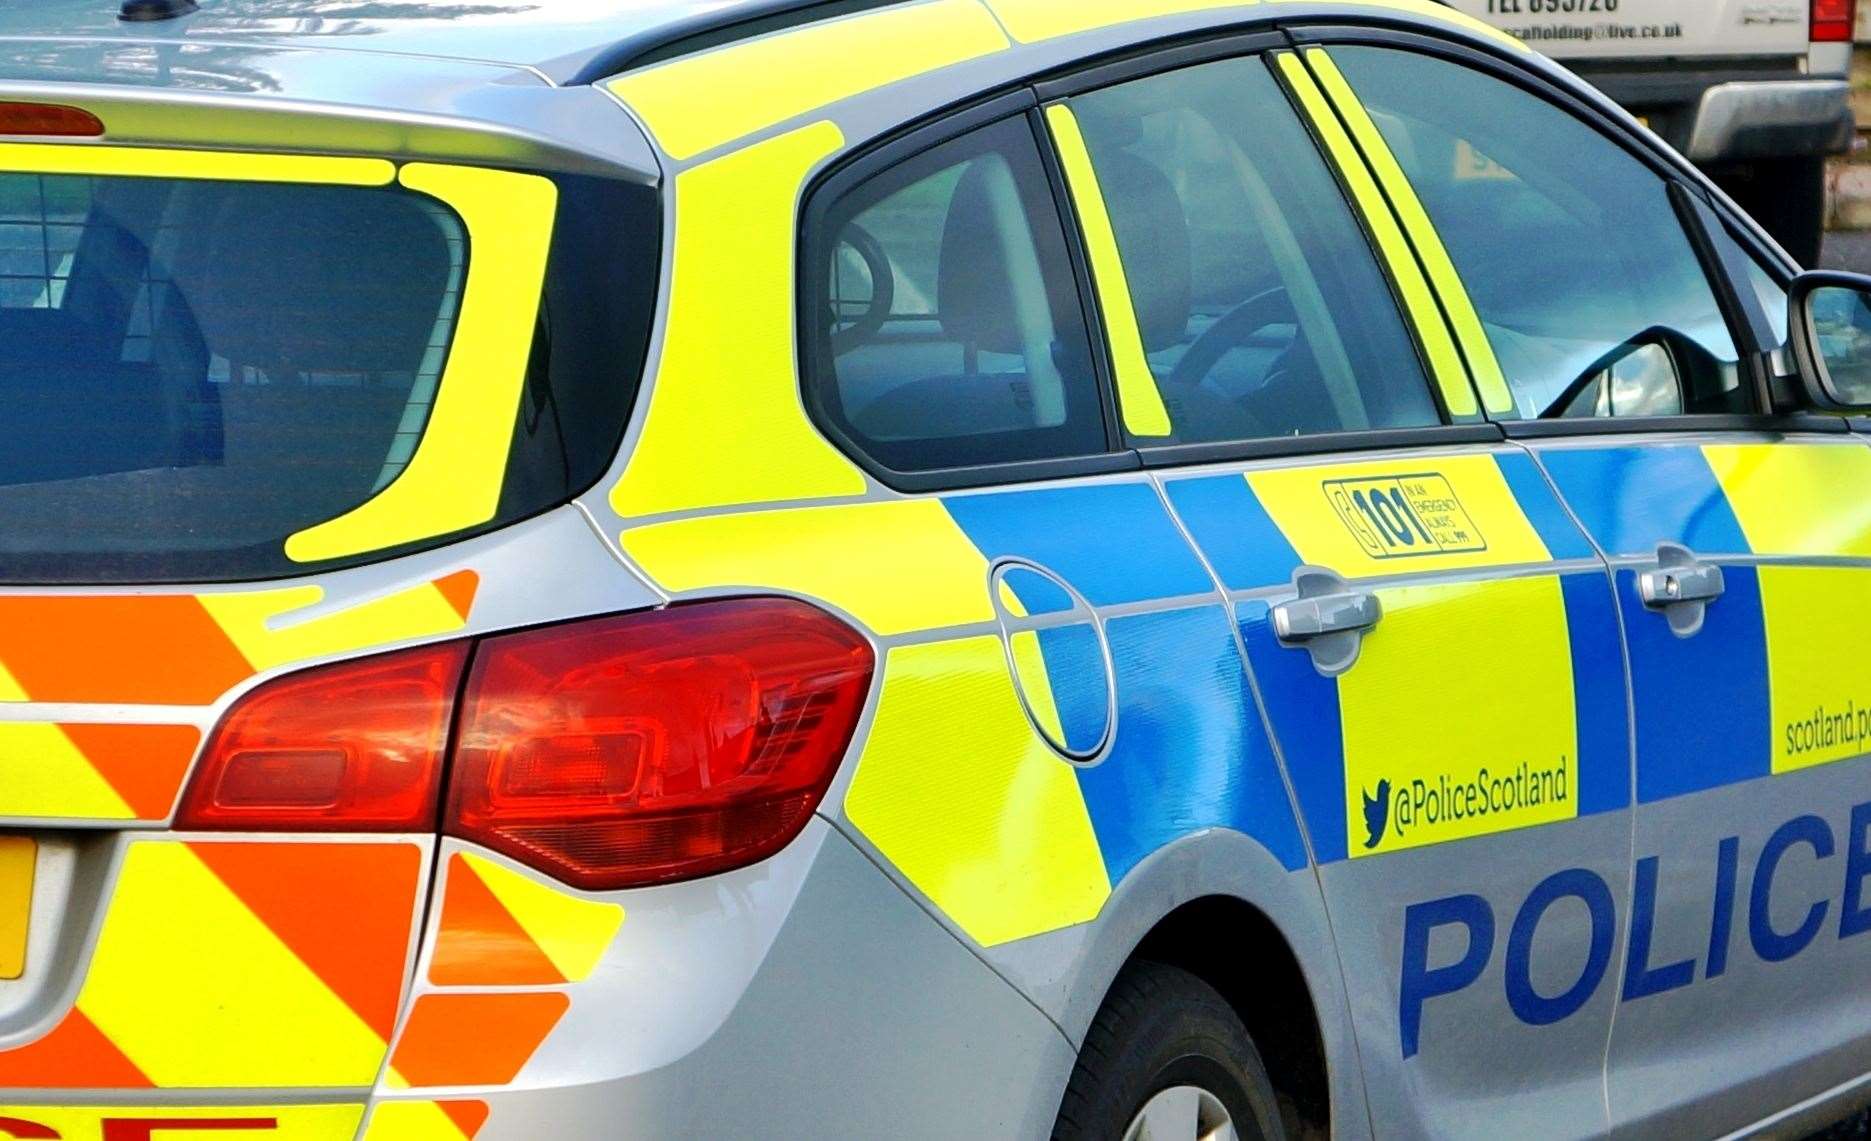 Police spoke to a number of youths after reports of anti-social behaviour in Thurso